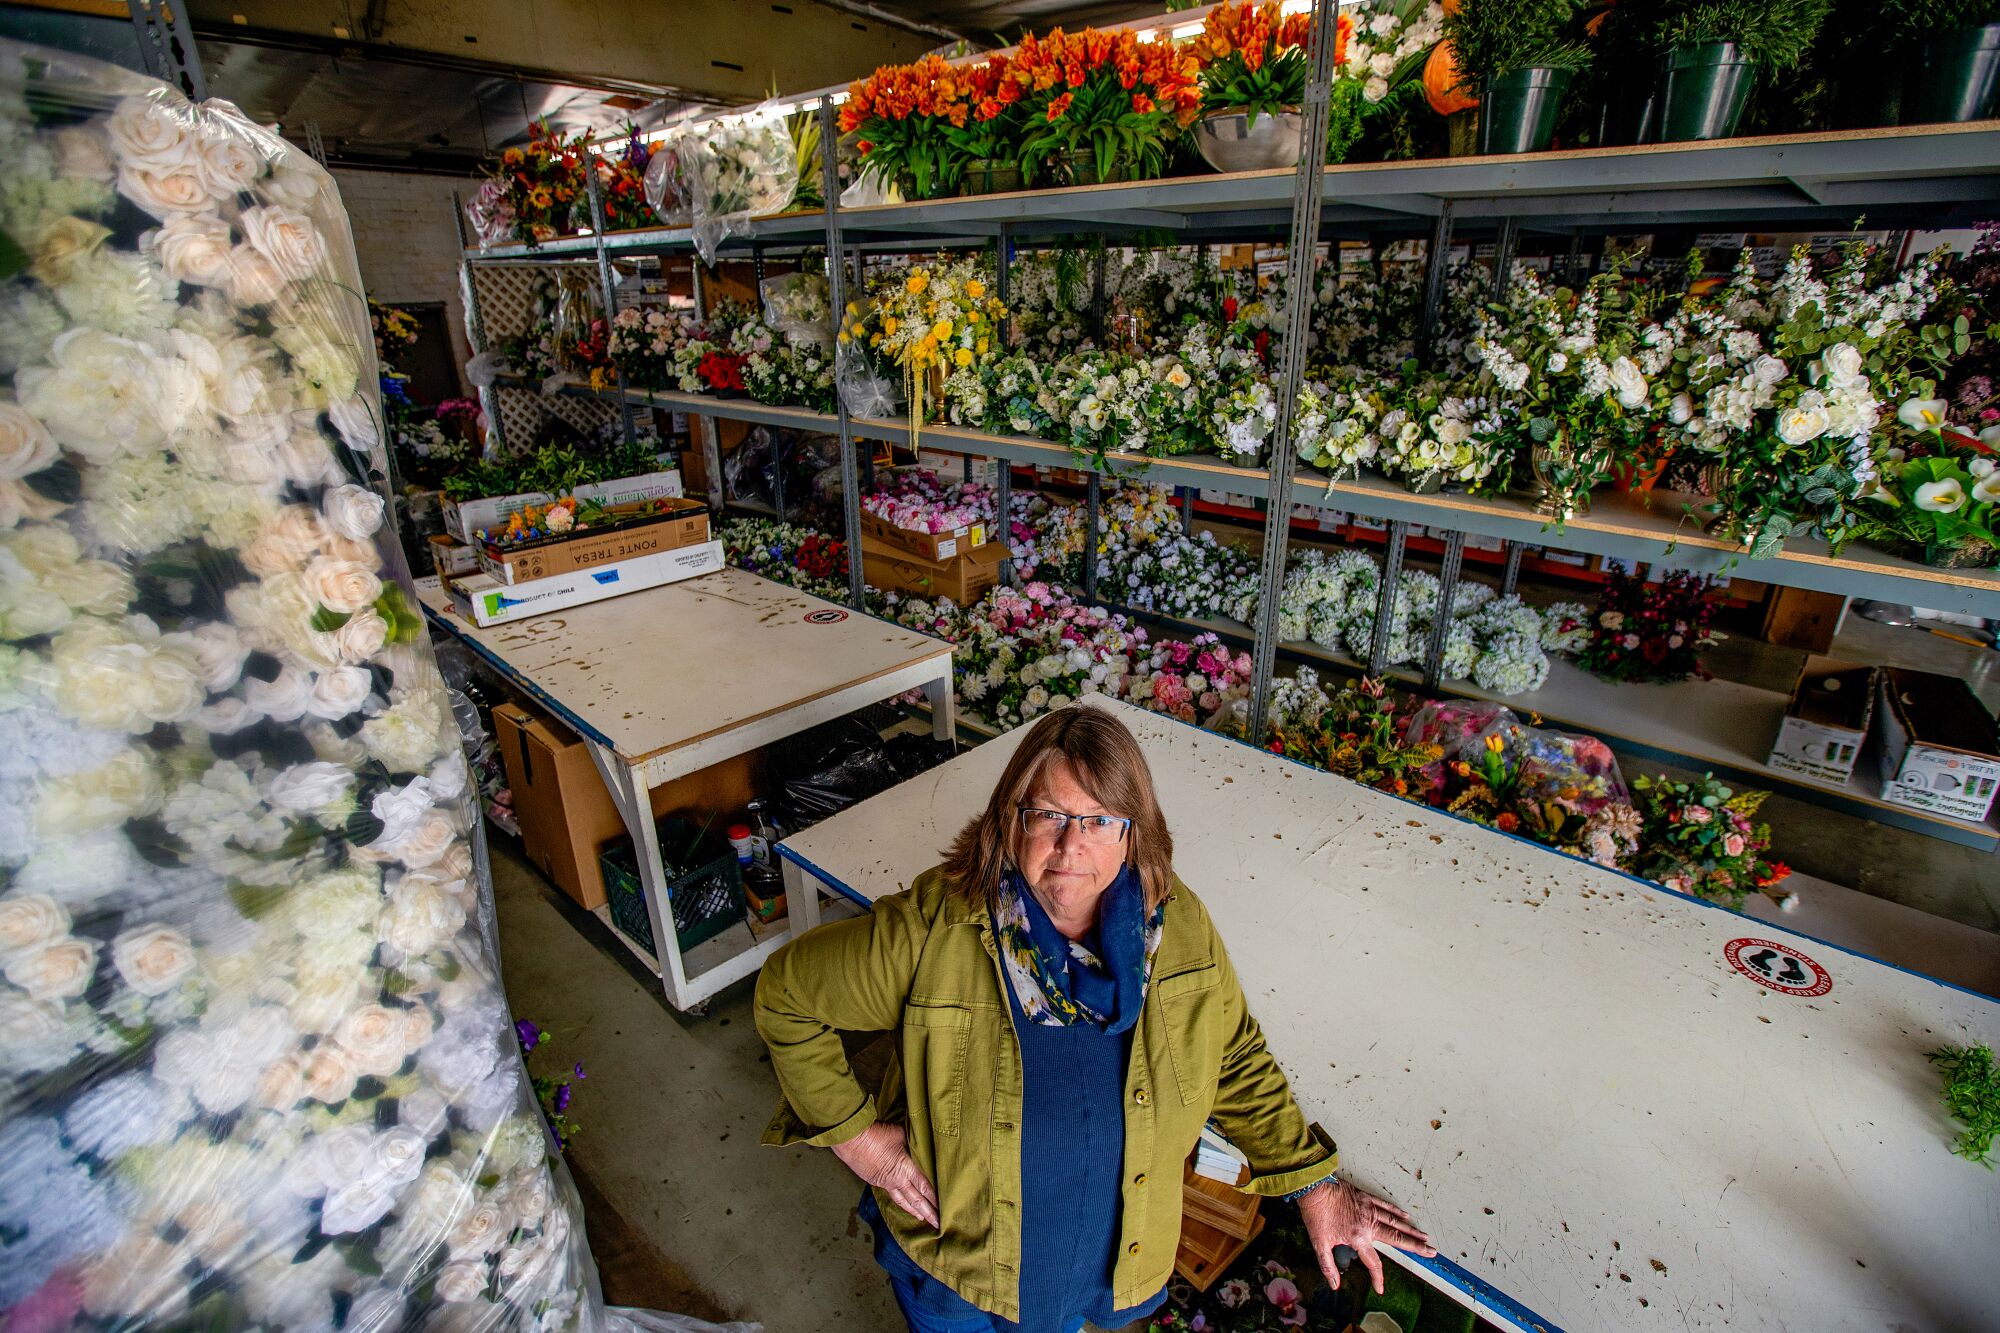 A woman leans on a table next to silk flowers, inside a warehouse.